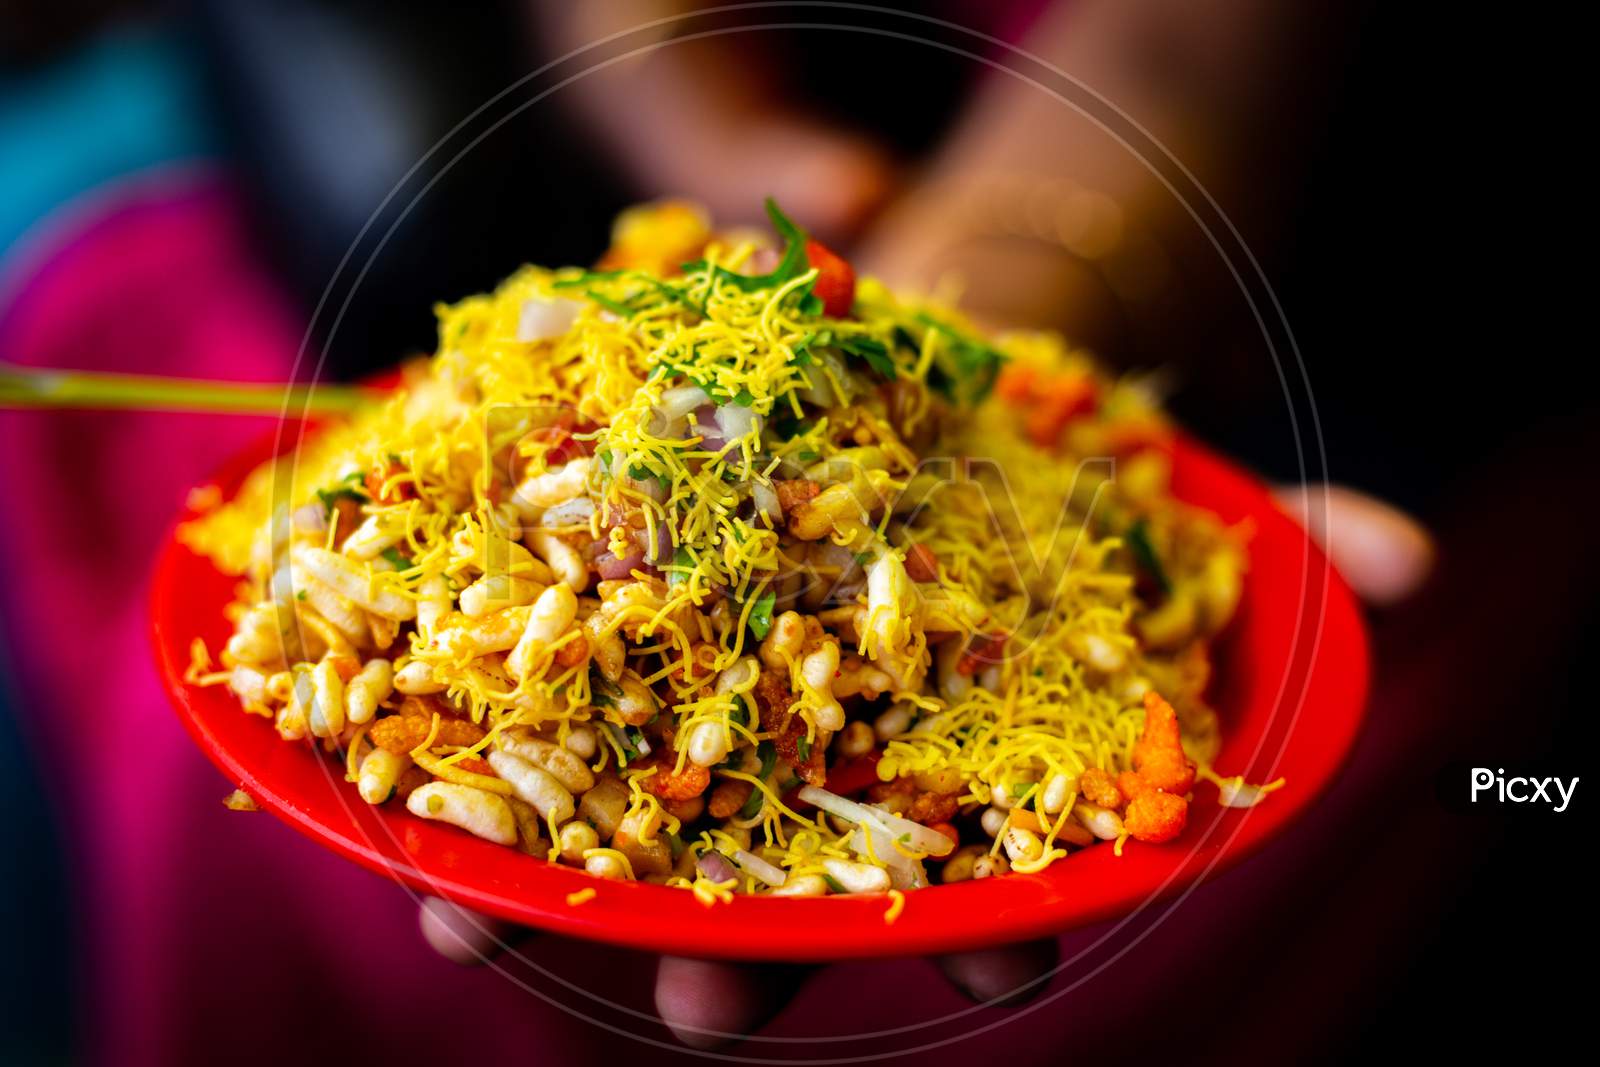 Bhelpuri an Indian delicious food chaat or snack